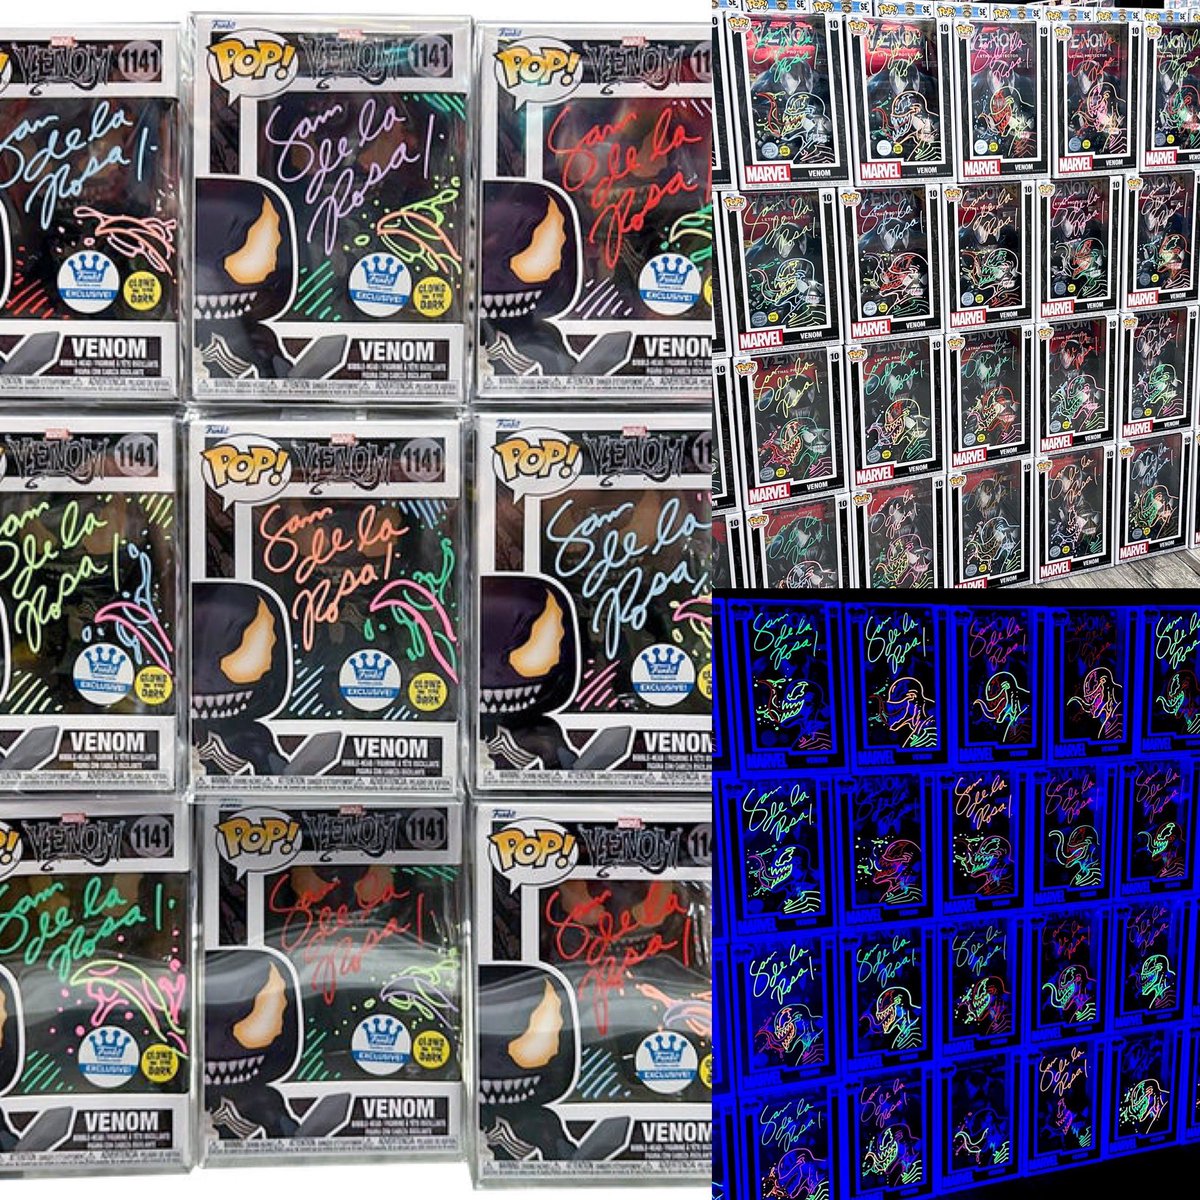 Signed Venom Pops & Comic Covers are available at @toytempleofficial! #Ad #Marvel #Venom . thetoytemple.com/collections/au… . #Funko #FunkoPop #FunkoPopVinyl #Pop #PopVinyl #Collectibles #Collectible #FunkoCollector #FunkoPops #Collector #Toy #Toys #DisTrackers